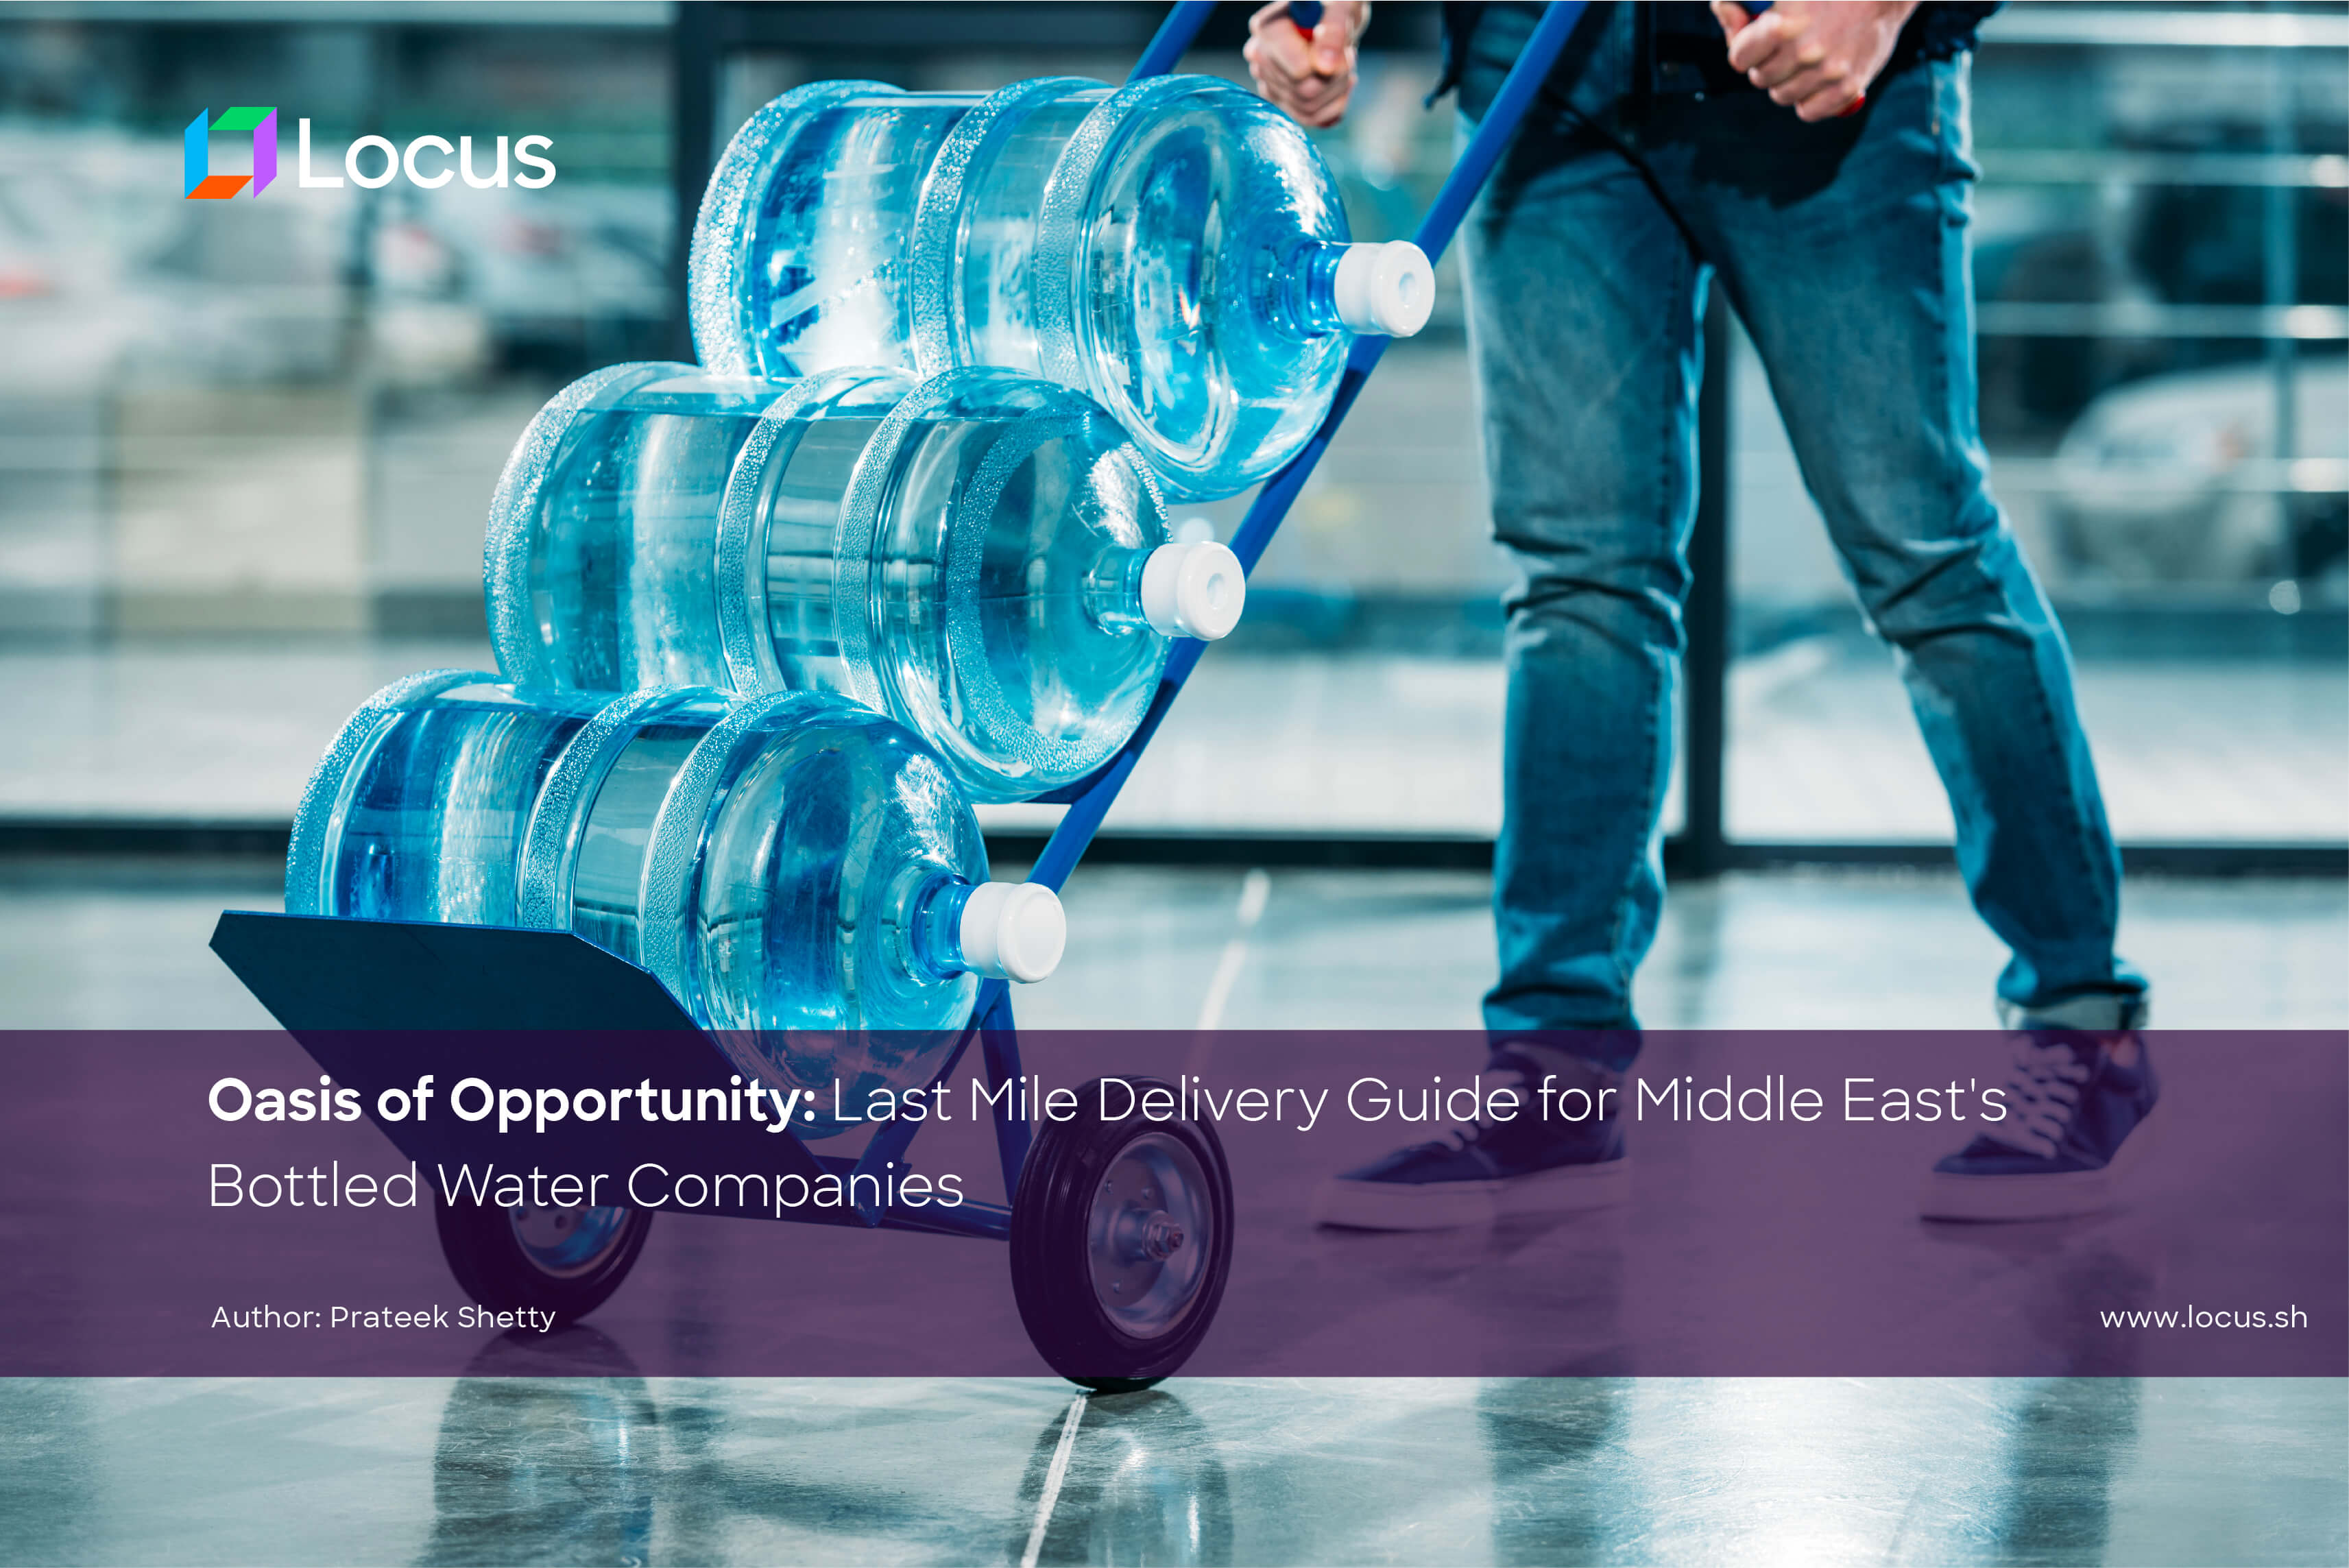 Middle East Bottled Water Manufacturers: Last-mile Delivery Strategies